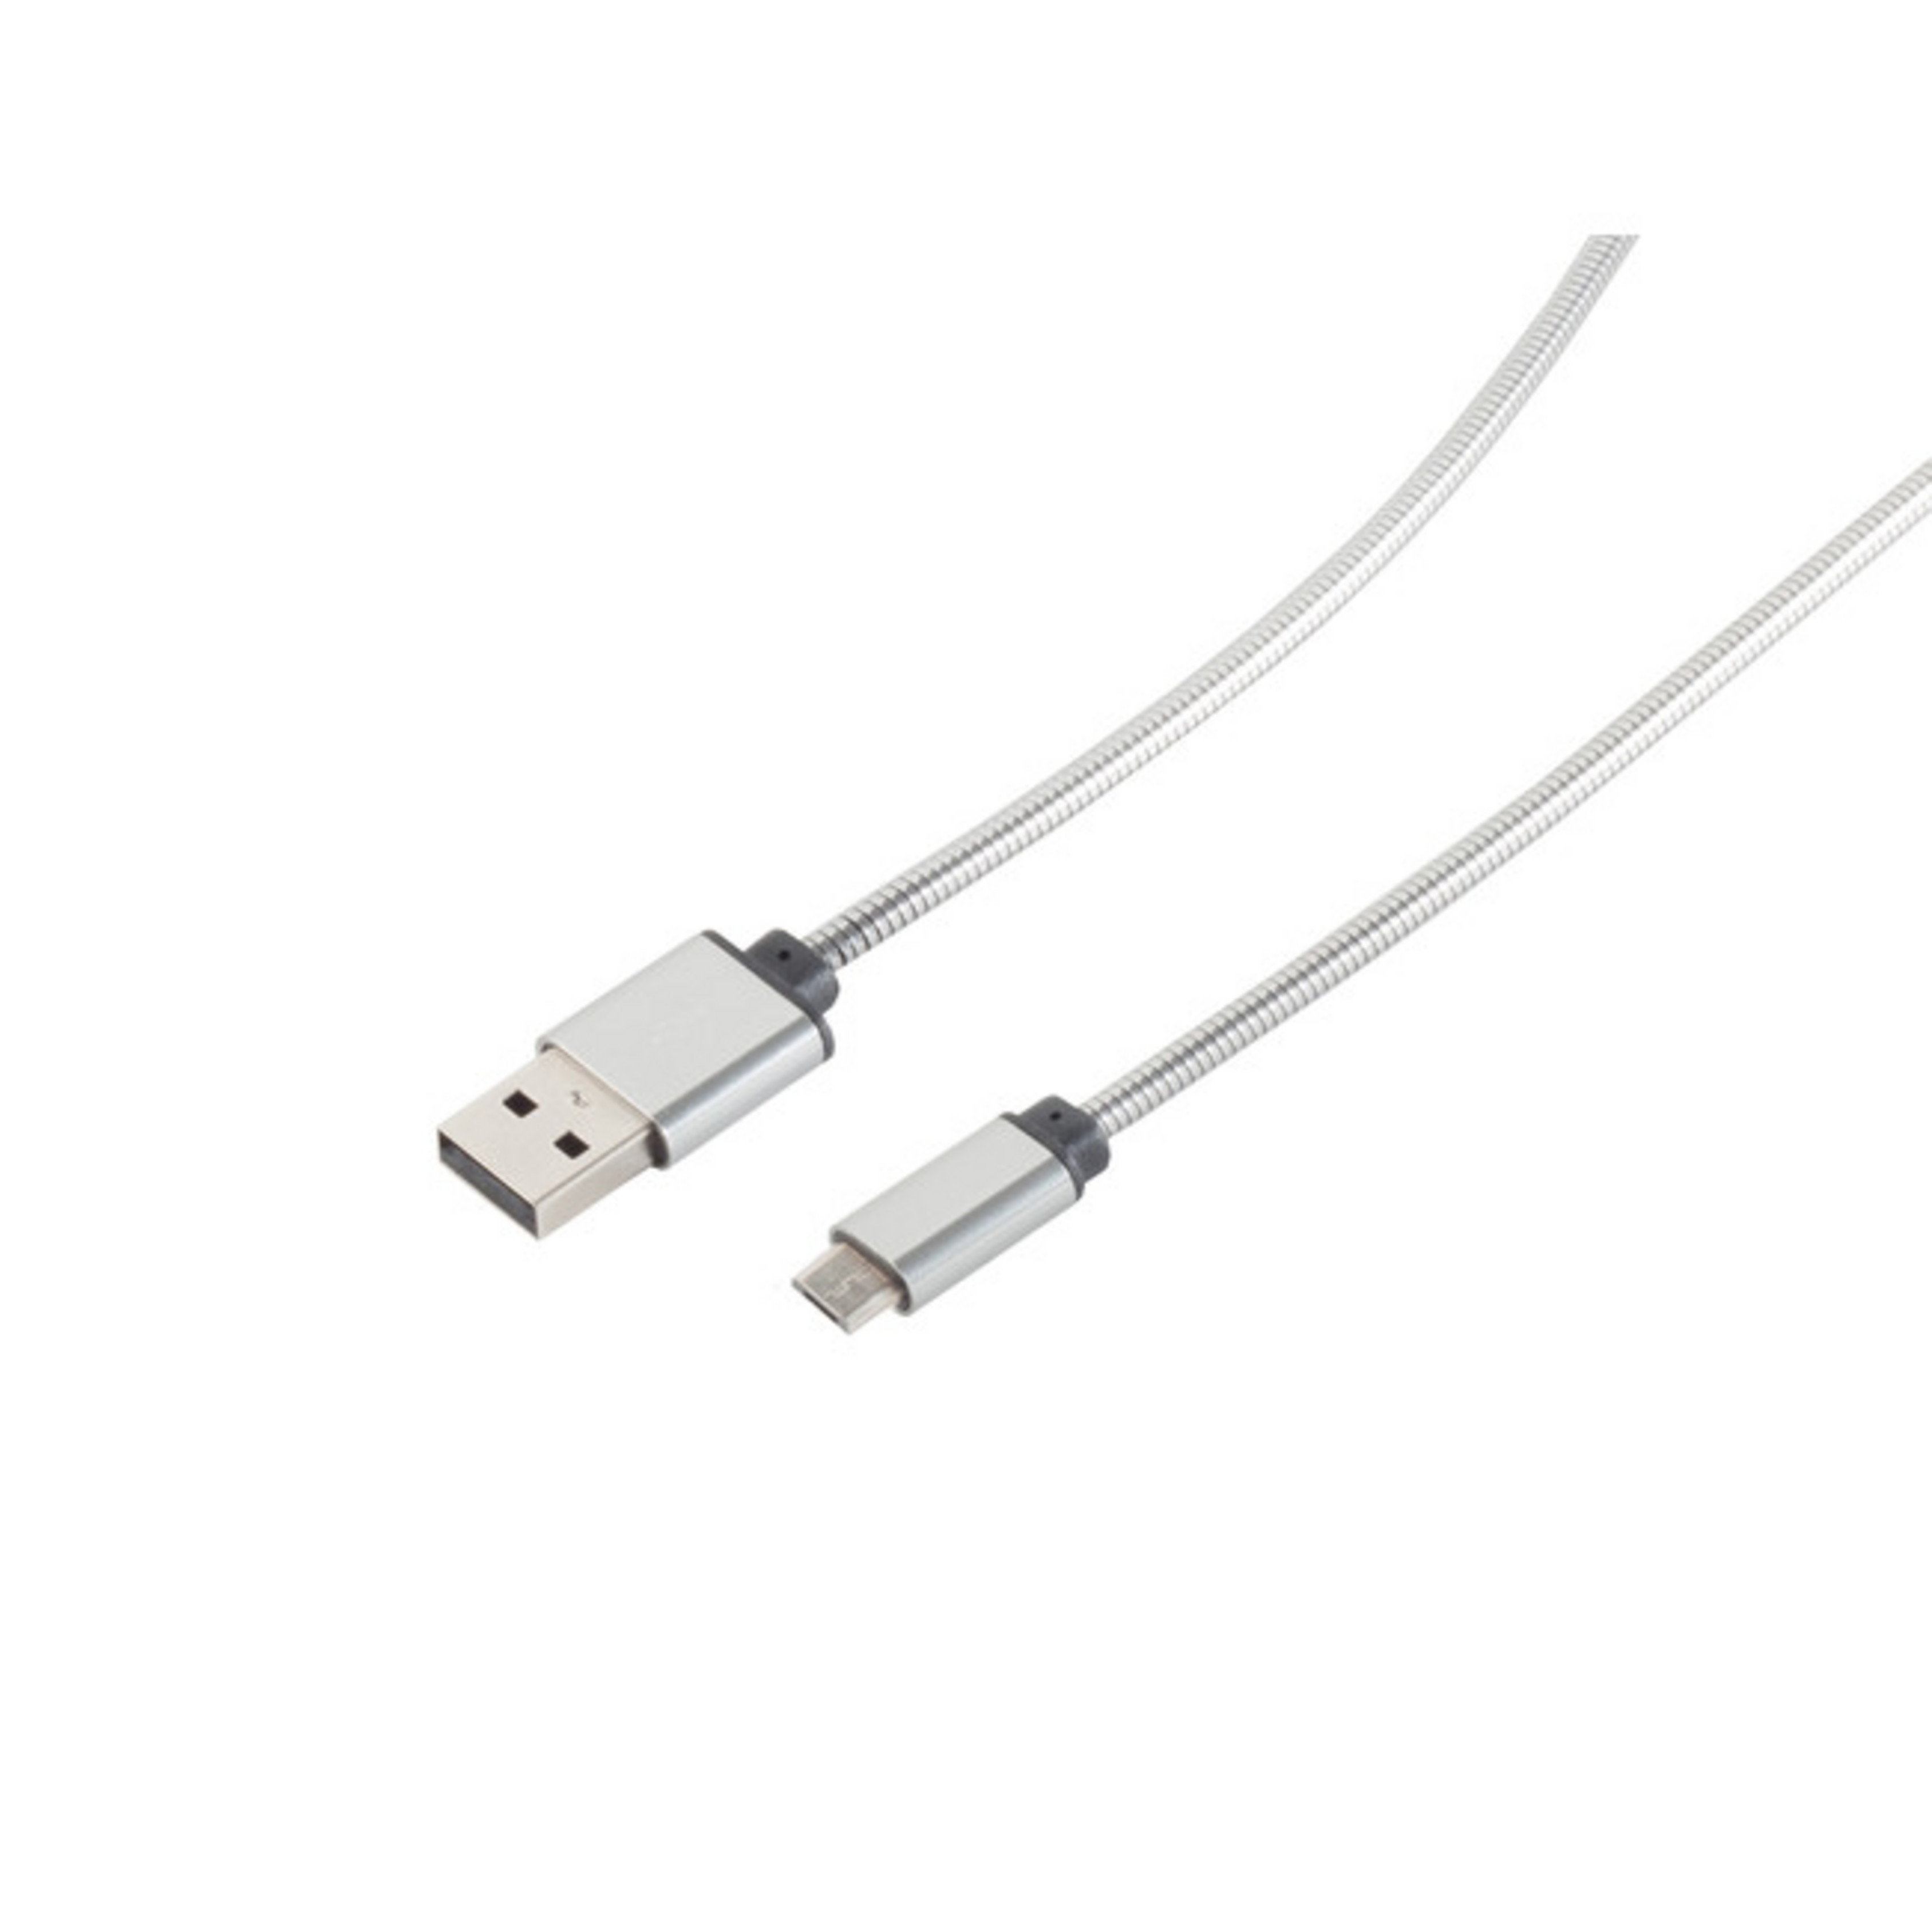 MAXIMUM 1m S/CONN Steel CONNECTIVITY A/ Kabel USB USB USB micro, Kabel Lade-Sync Silber